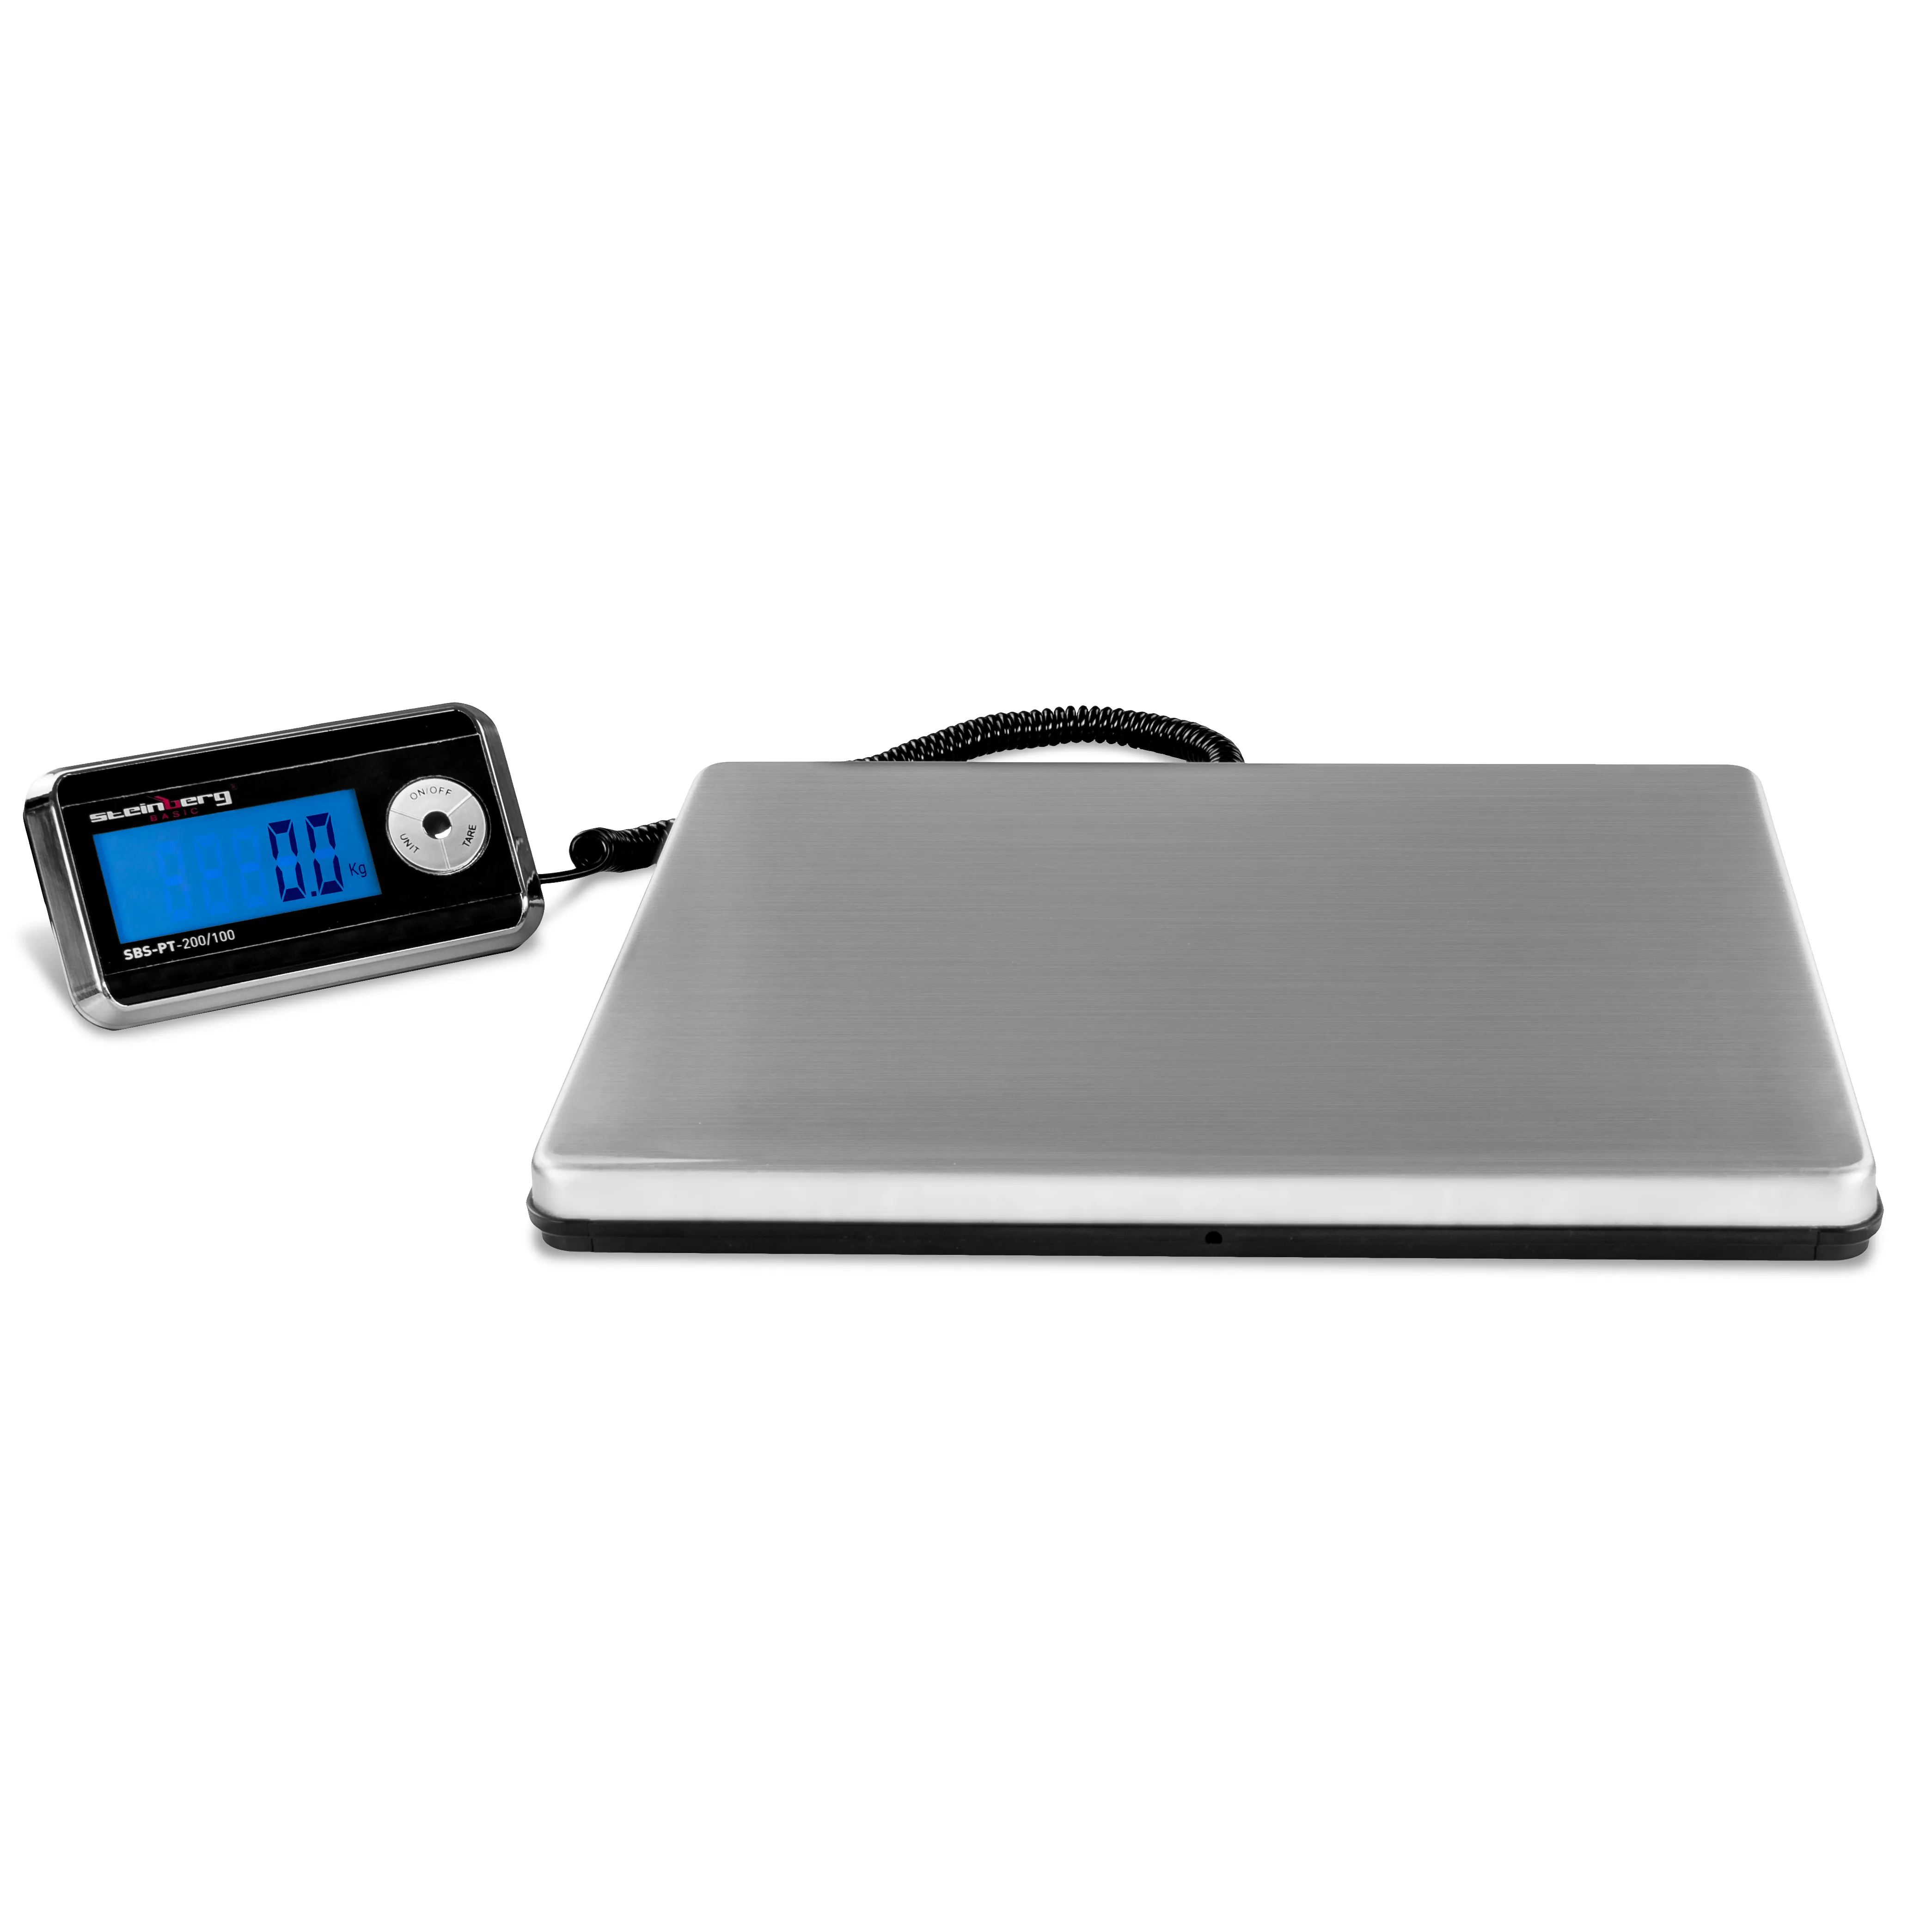 Digital Parcel Scale - 200 kg / 100 g - Basic - External LCD-Display - German Quality | CE Certified | Market Leading Price